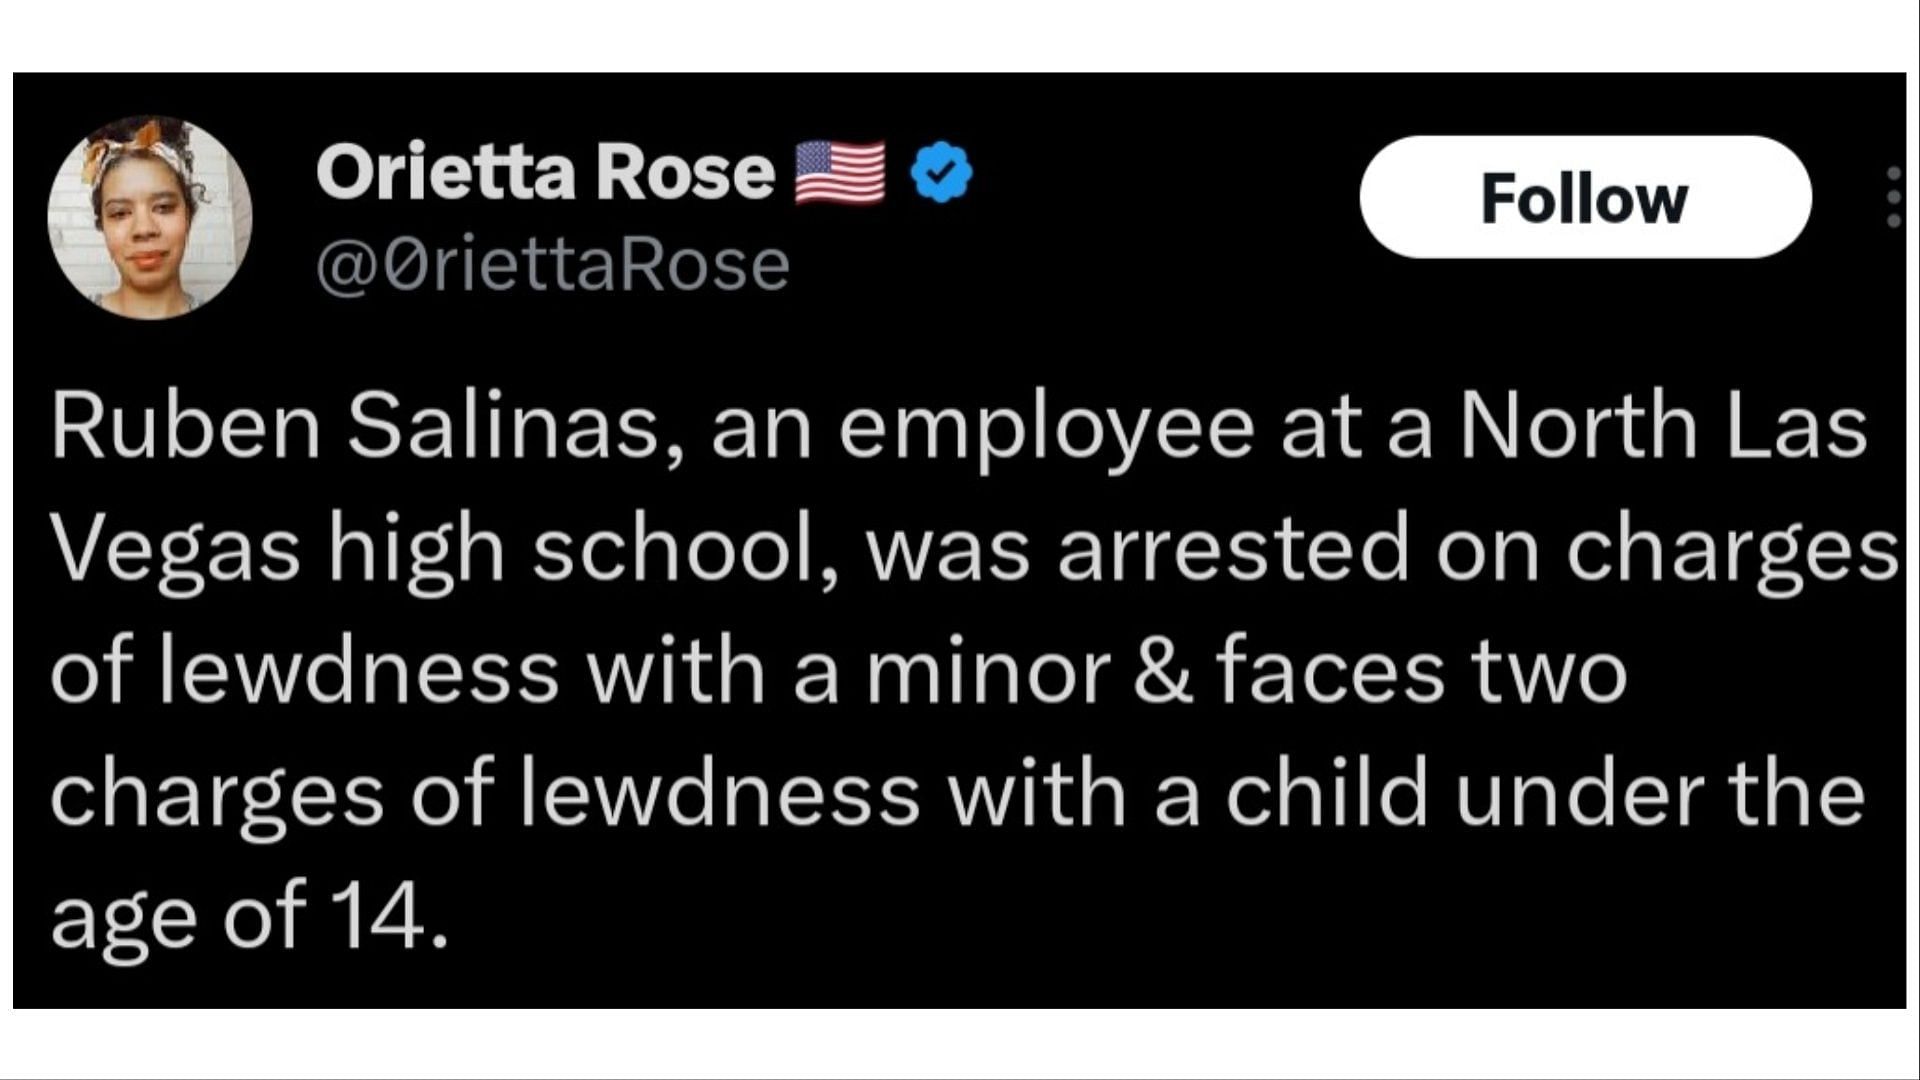 Salinas has been accused of lewdness with a minor (Image via @OriettaRose/Twitter)